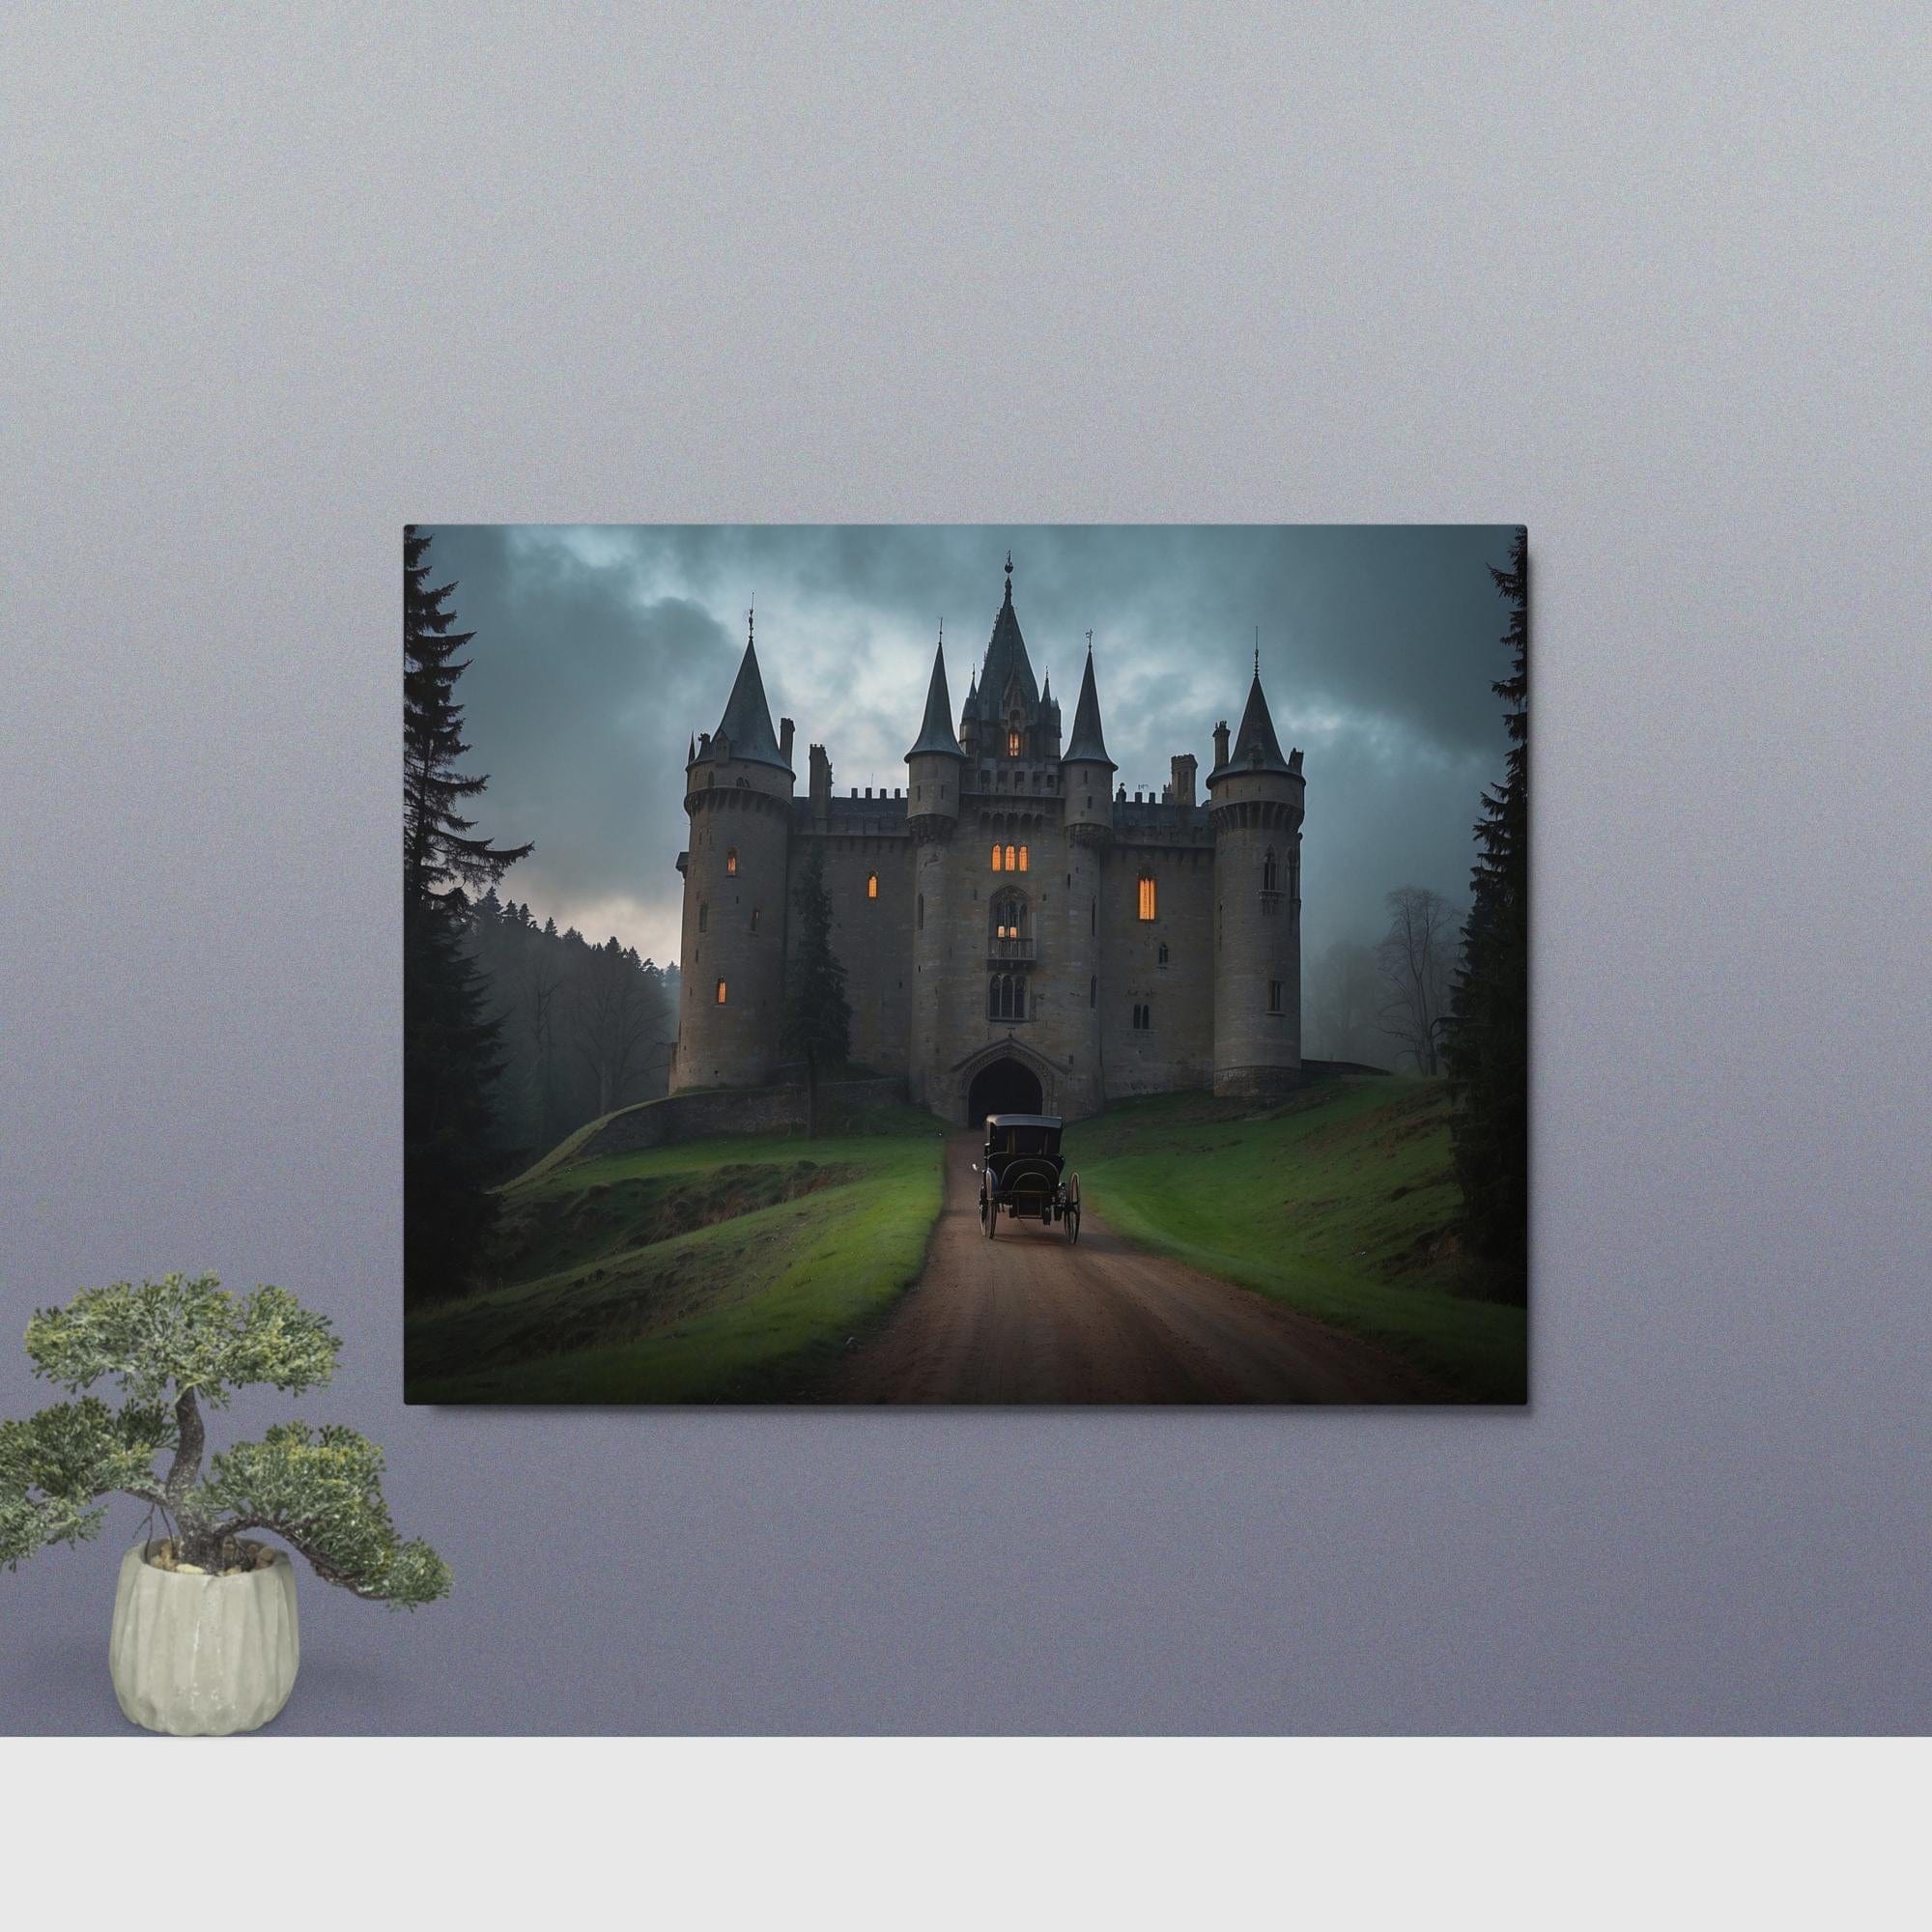 Moonrise Merchandise 11″×14″ Metal Wall Art- Gothic Castle with carriage 7082500_15136